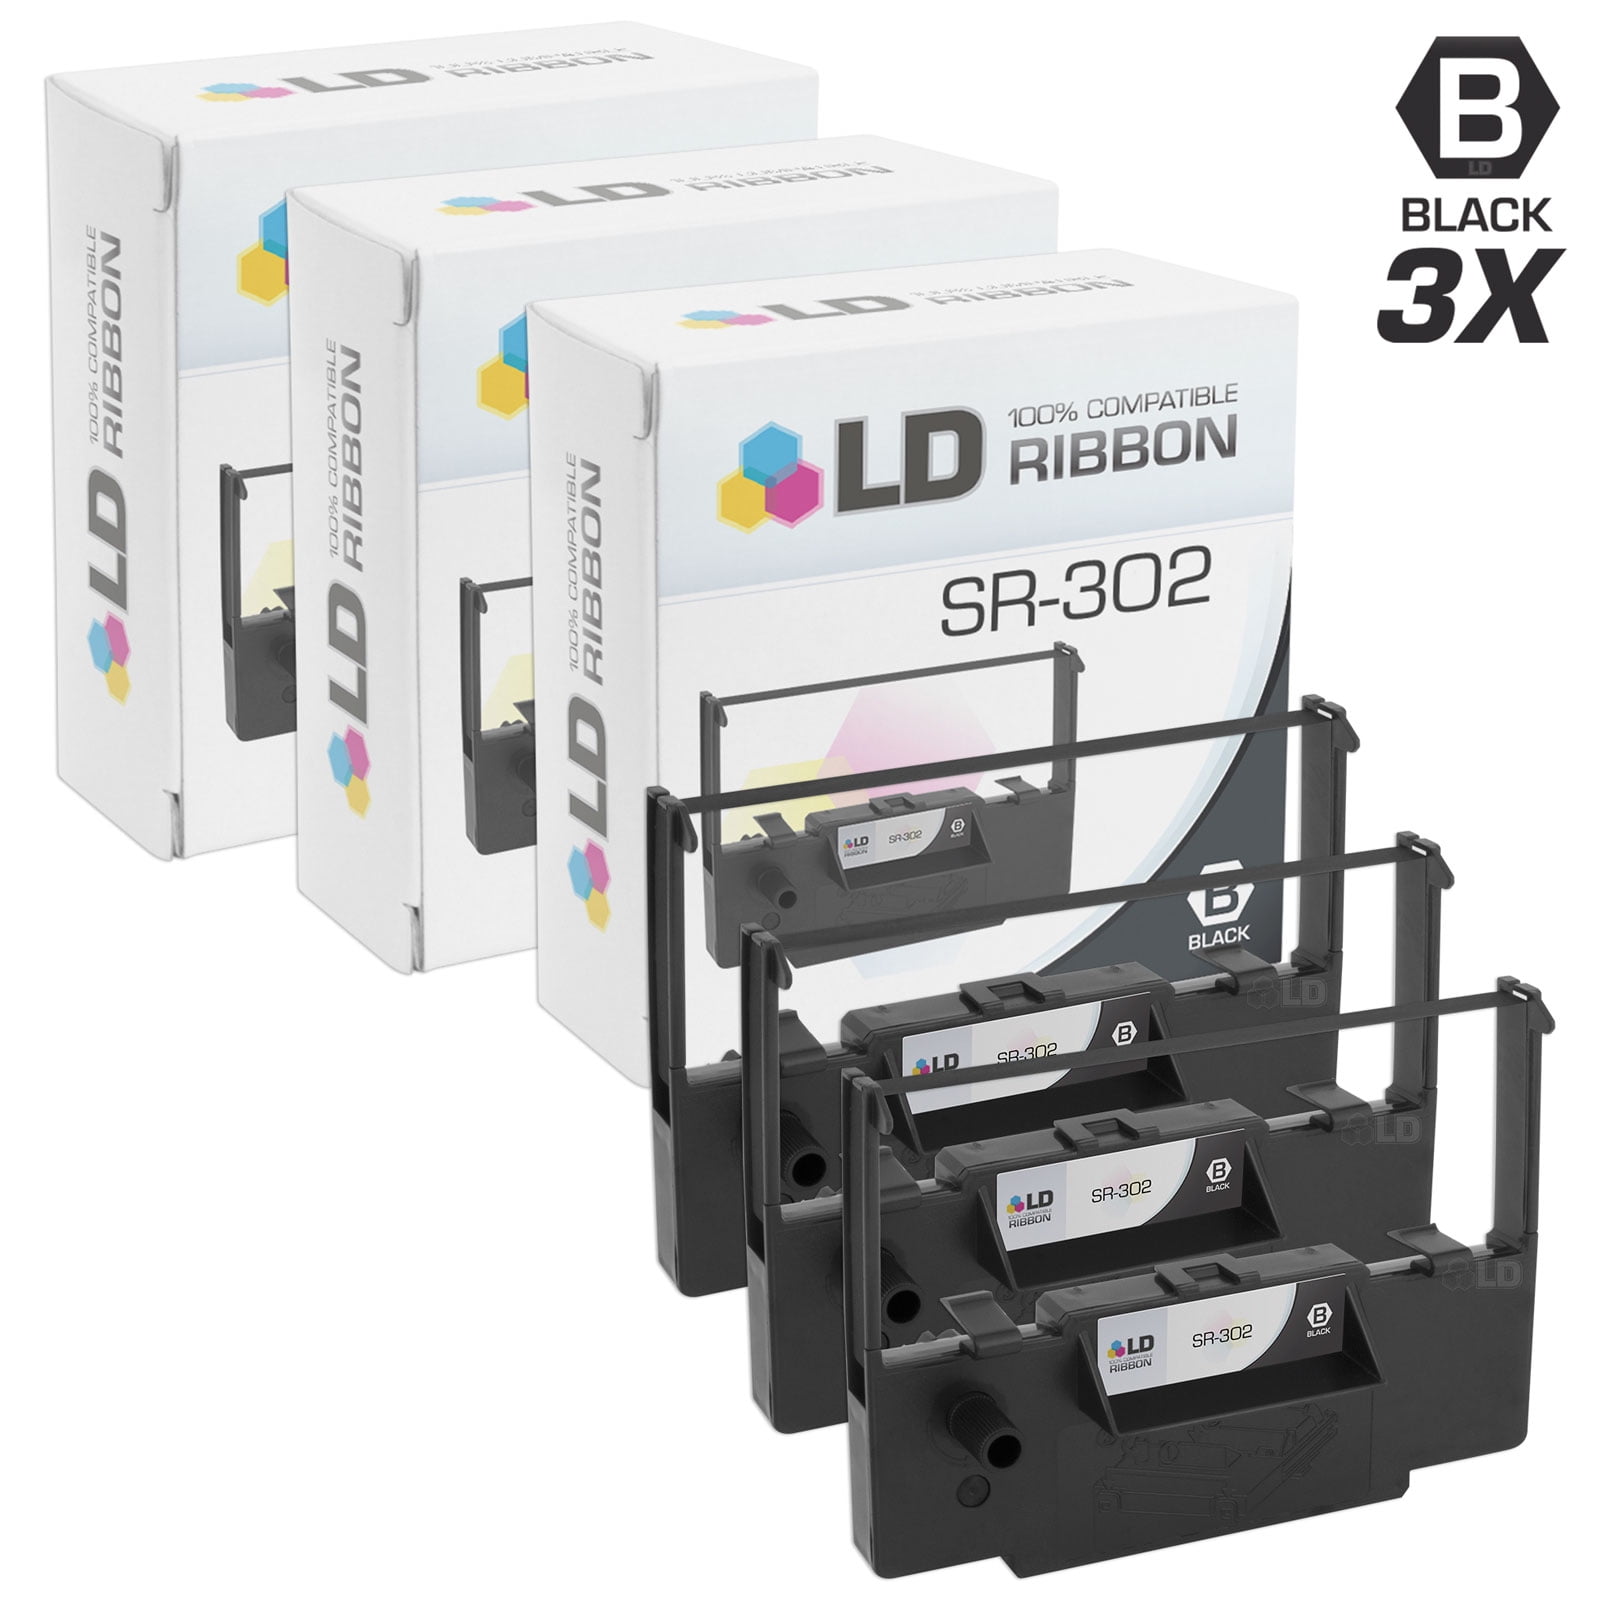 Black, 5-Pack LD Compatible Printer Ribbon Cartridge Replacement for Brother SR-302 